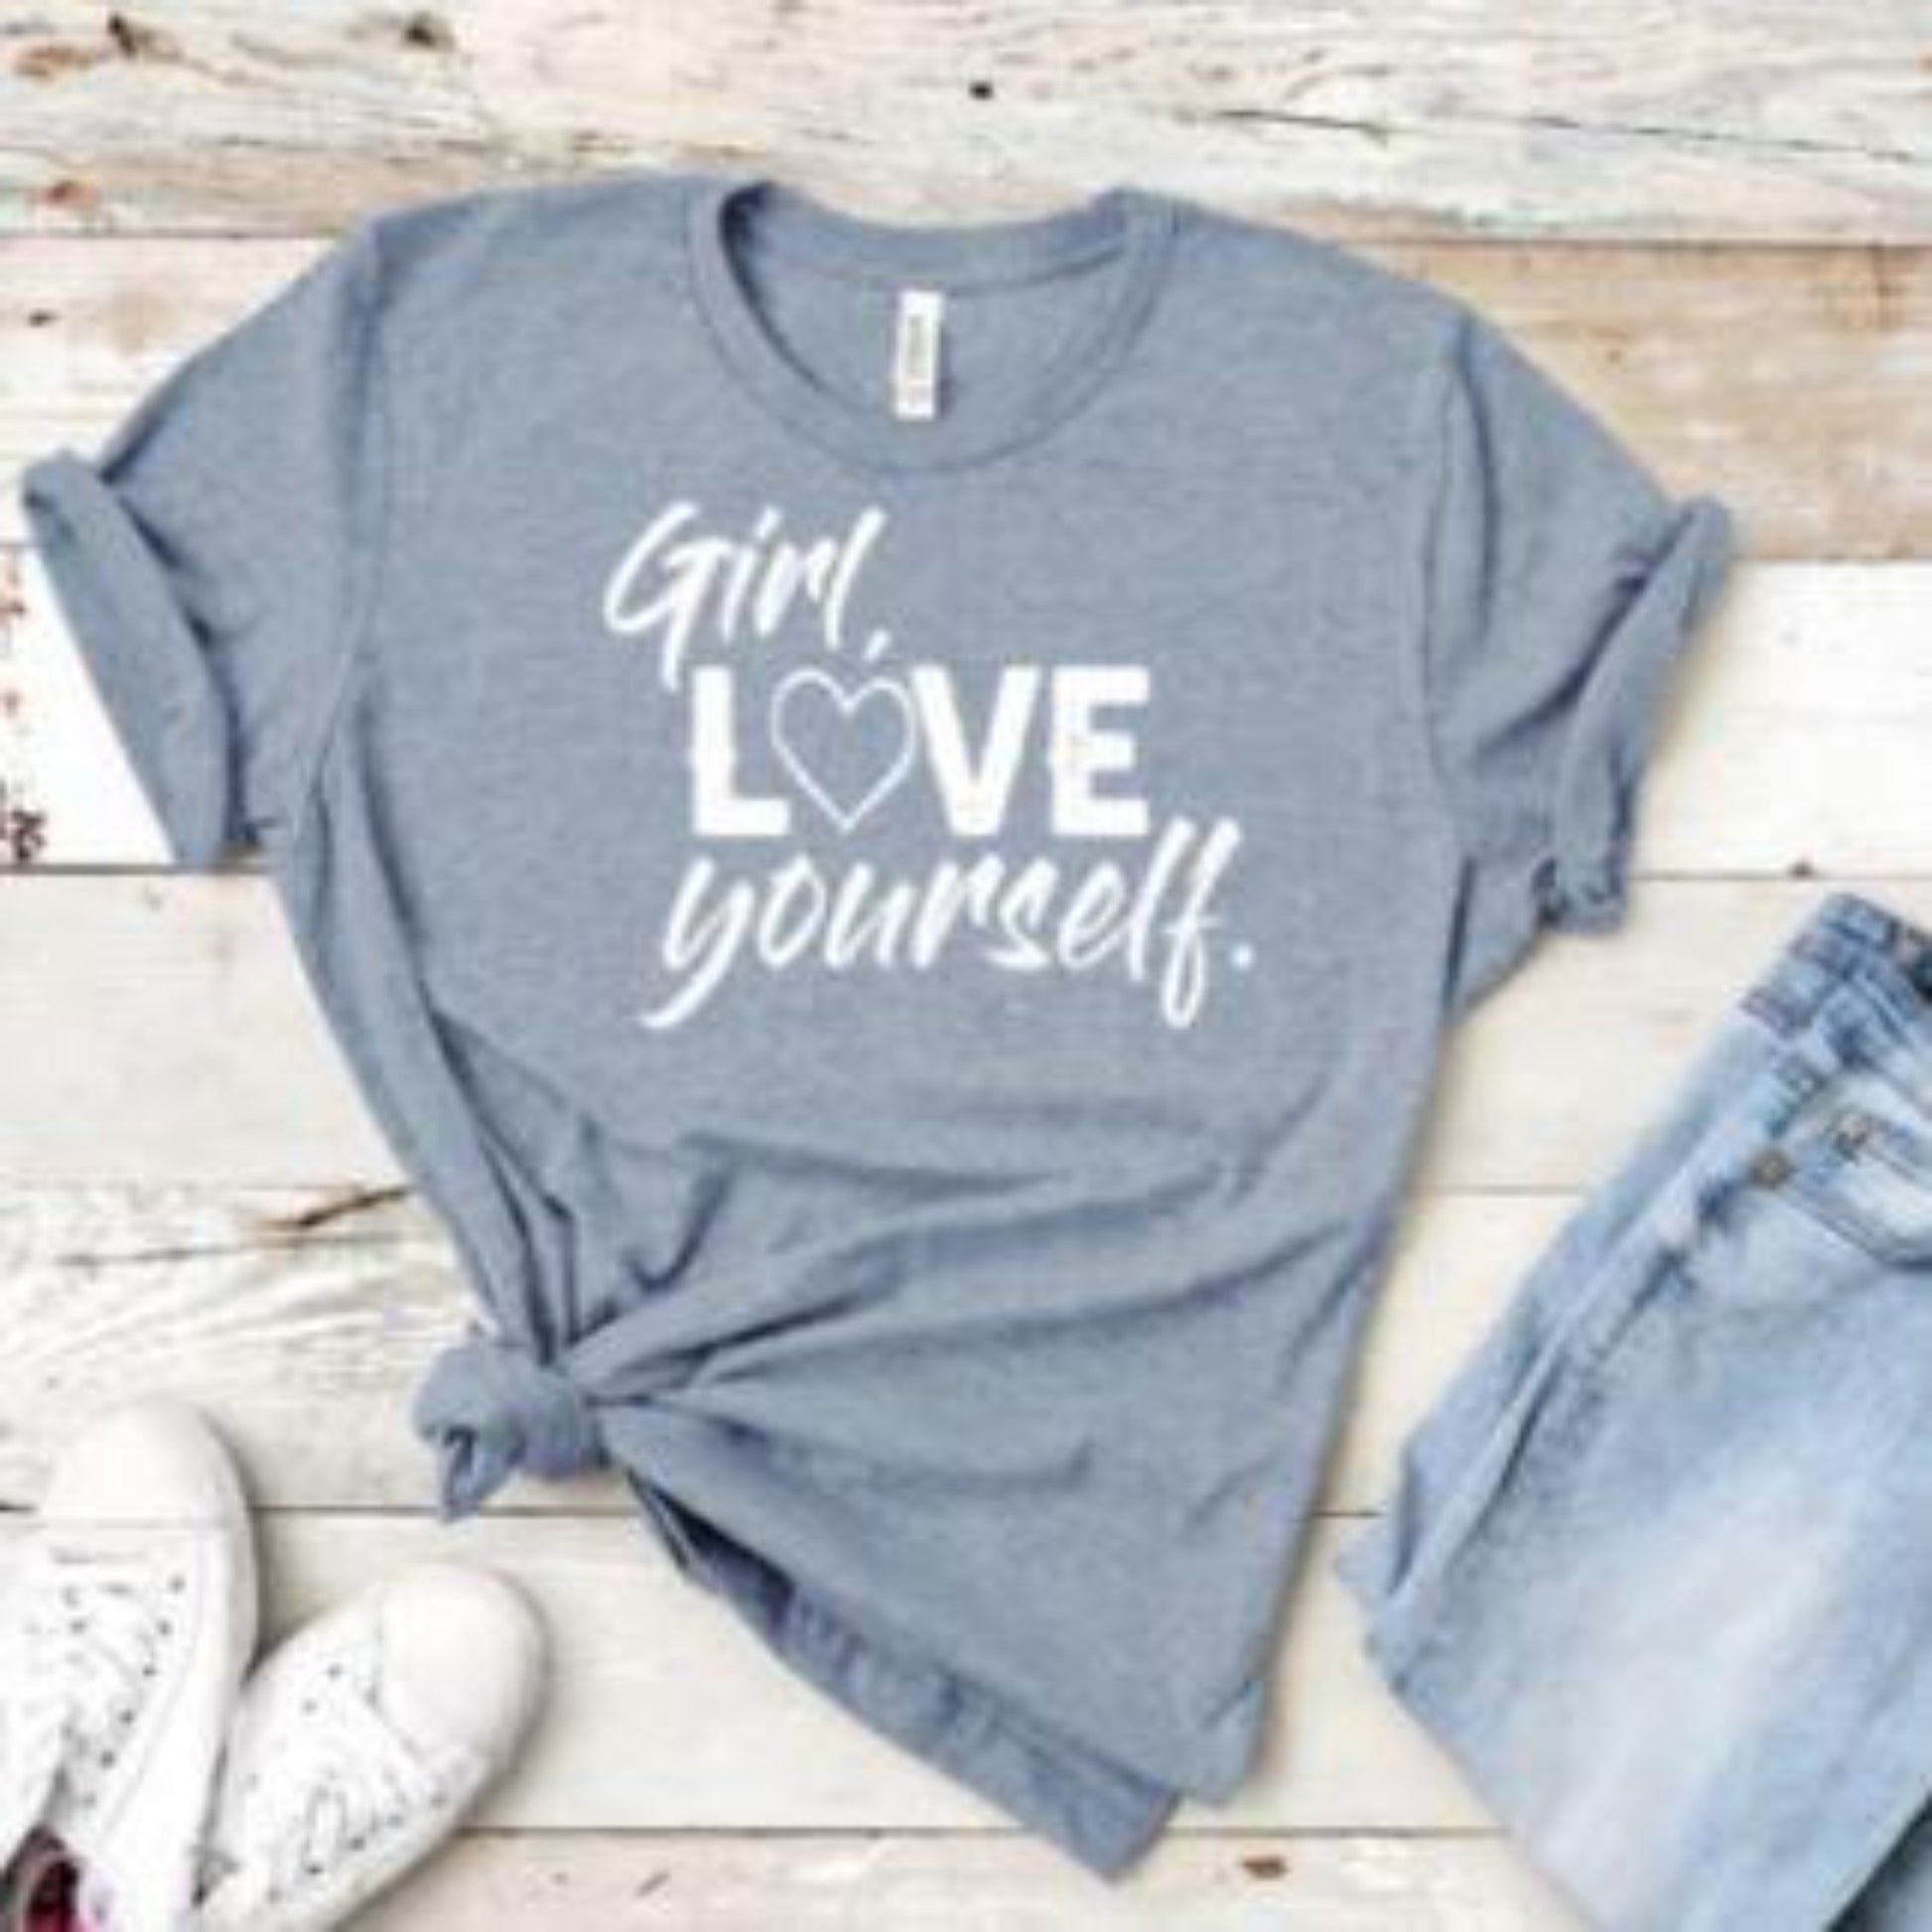 girl_love_yourself specialty tees everyday wear casual tshirt comfortable shirt